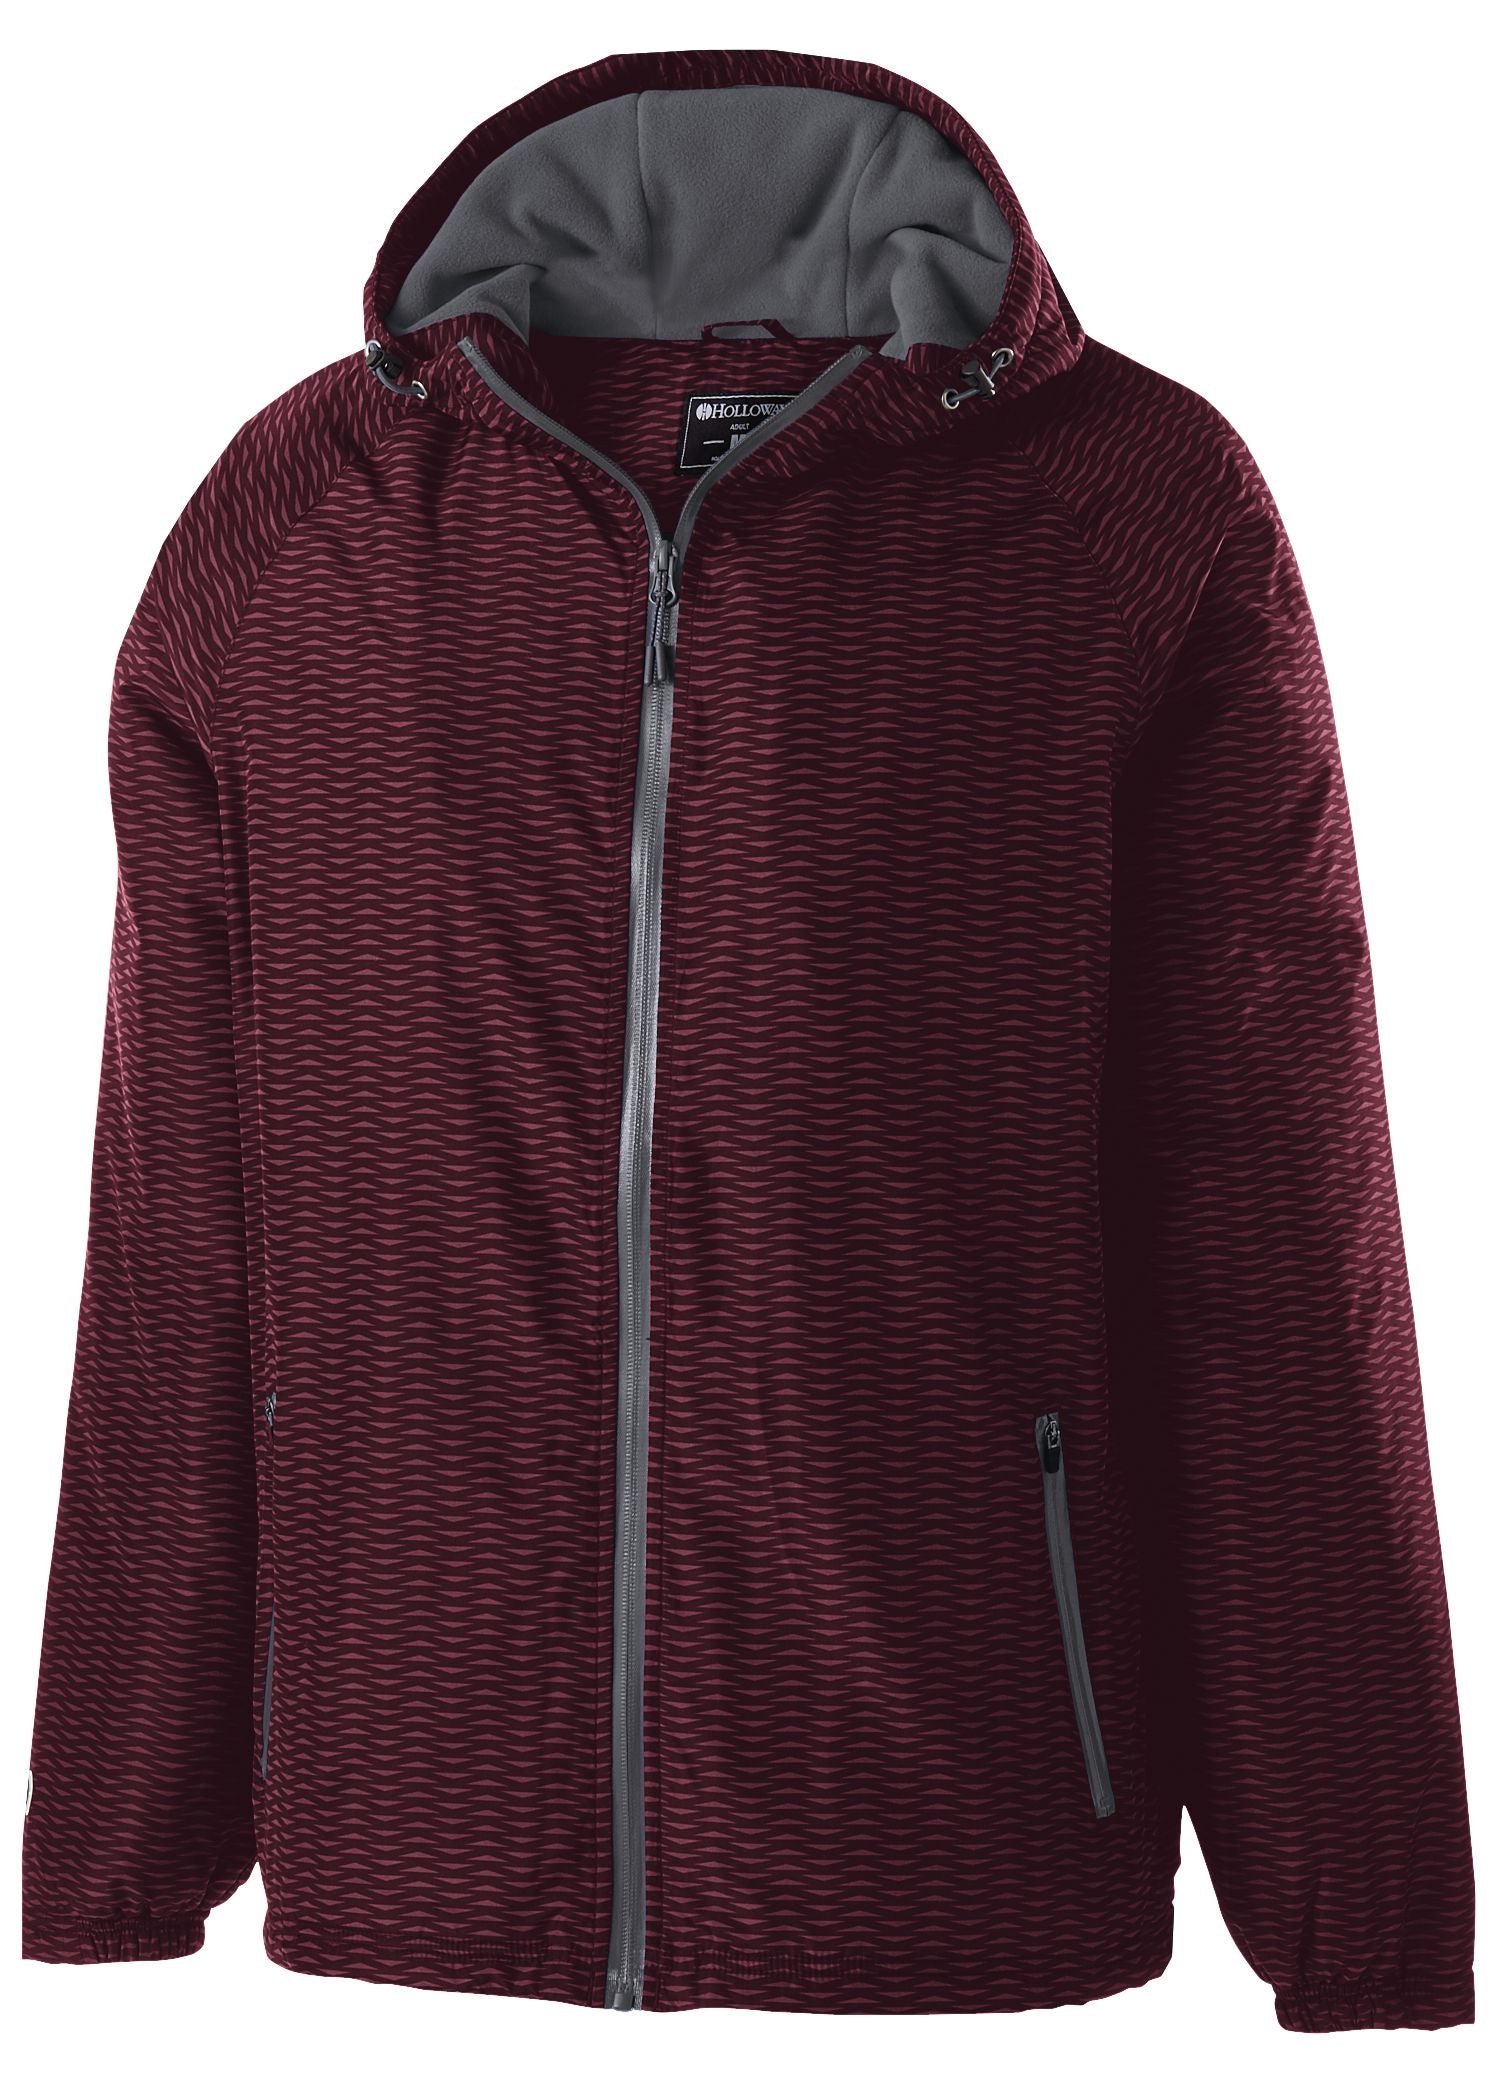 Holloway Range Jacket in Maroon/Carbon  -Part of the Adult, Adult-Jacket, Holloway, Outerwear, Range-Collection product lines at KanaleyCreations.com